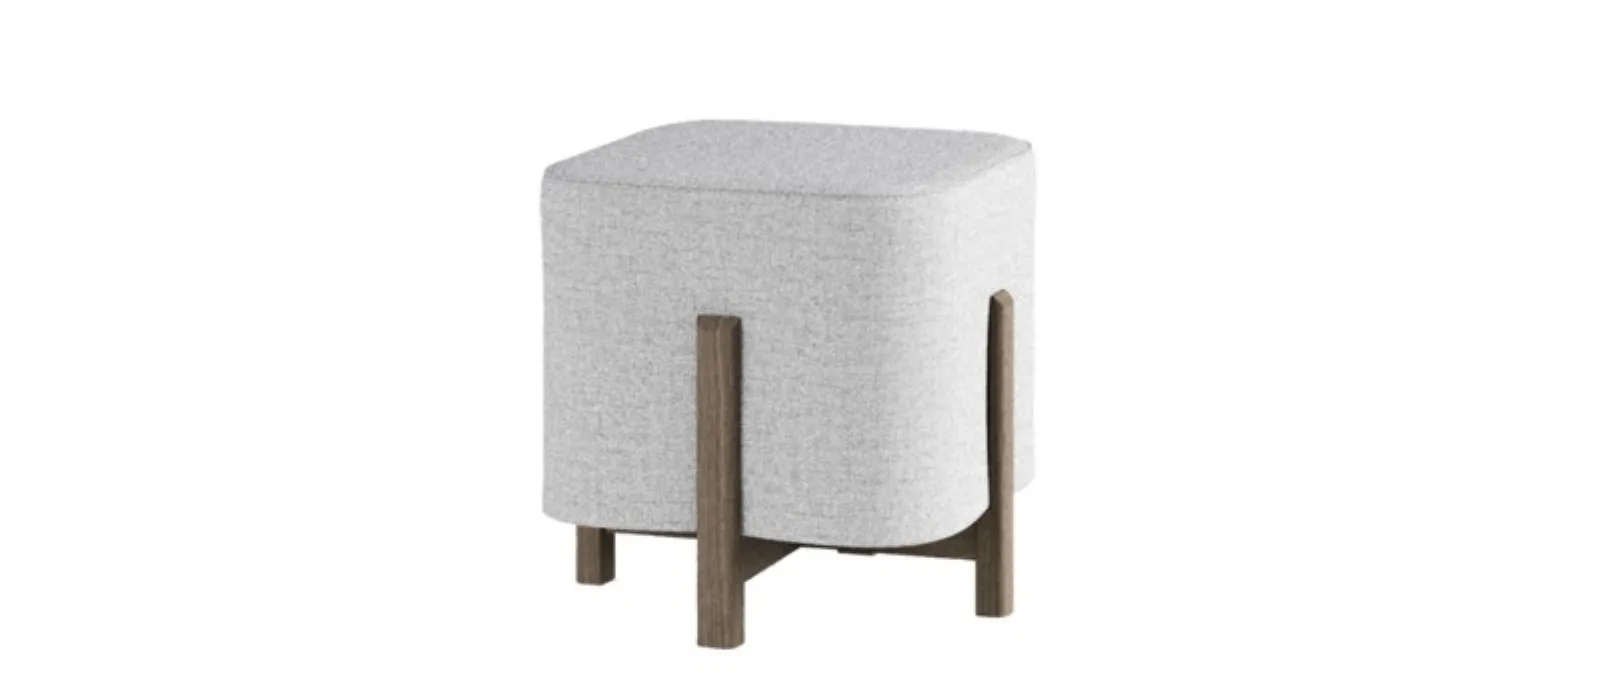 kip pouf with wooden frame